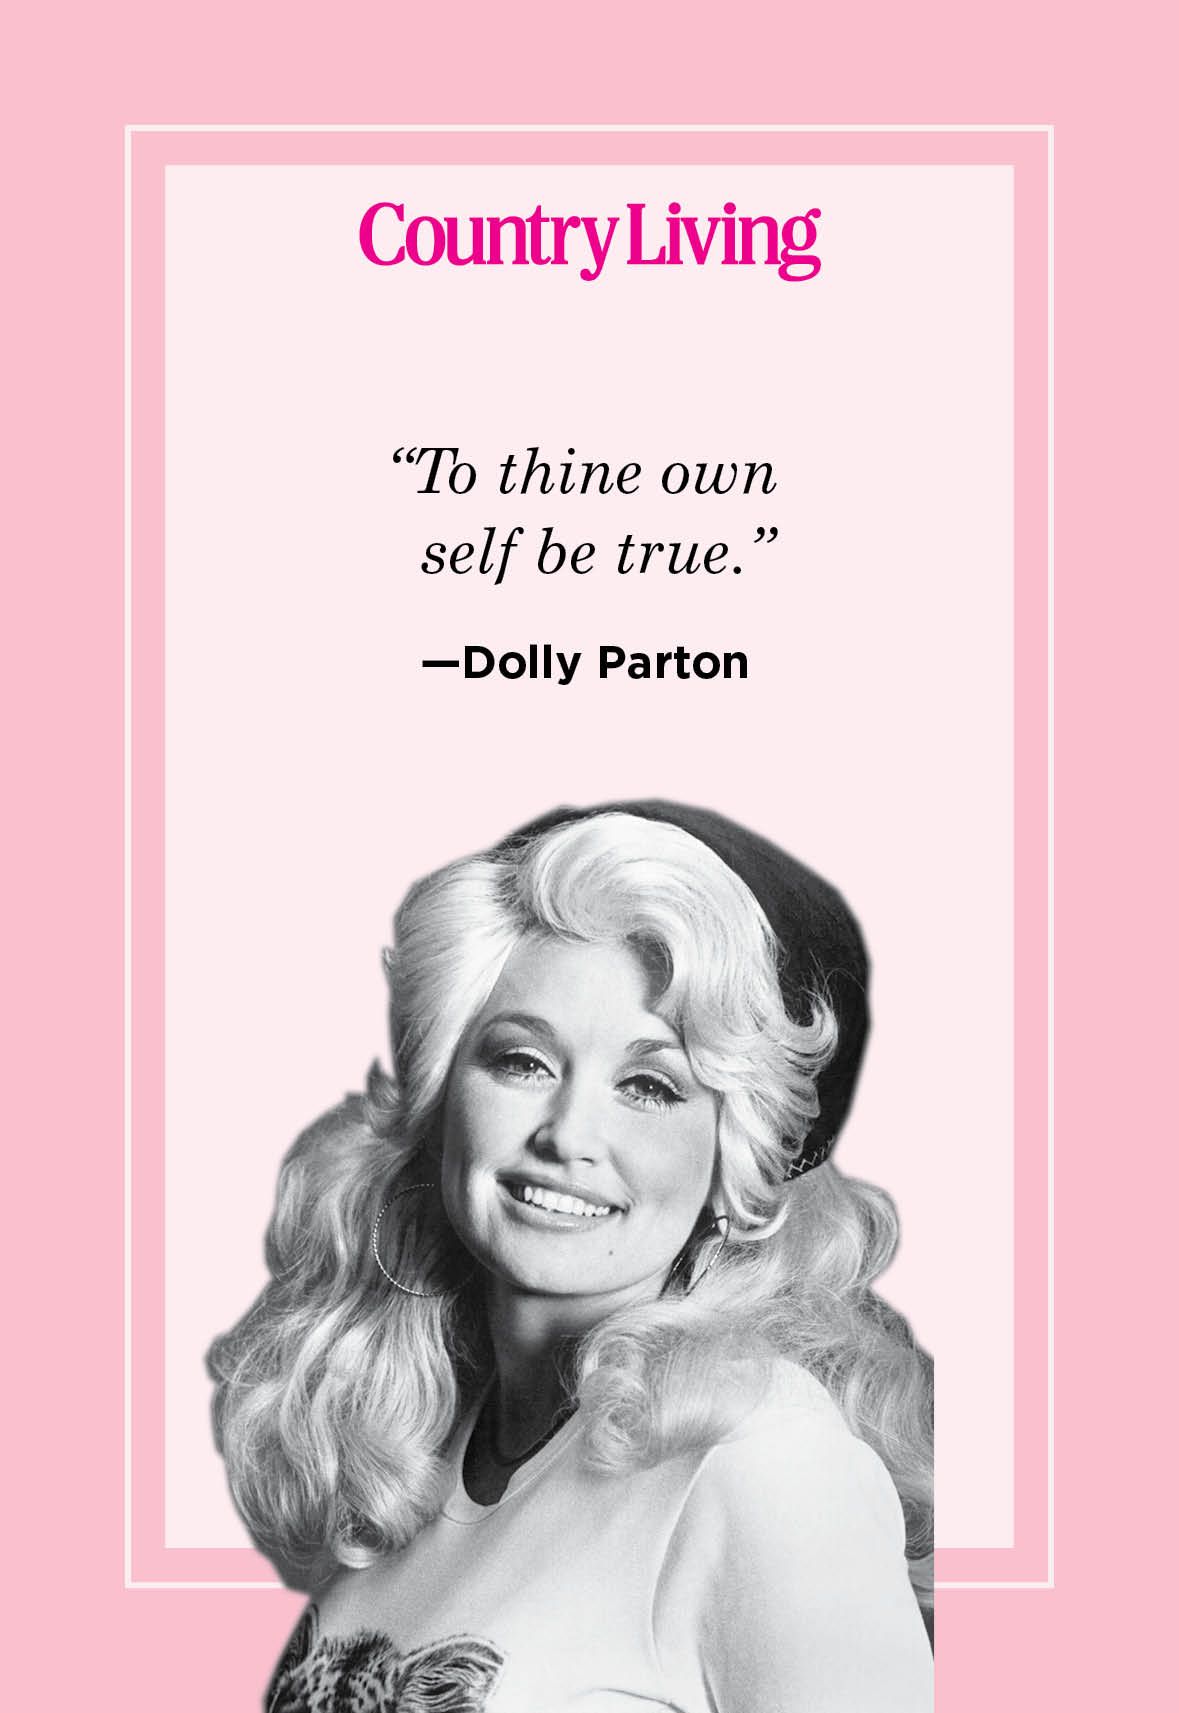 Dolly parton quote HD wallpapers  Pxfuel